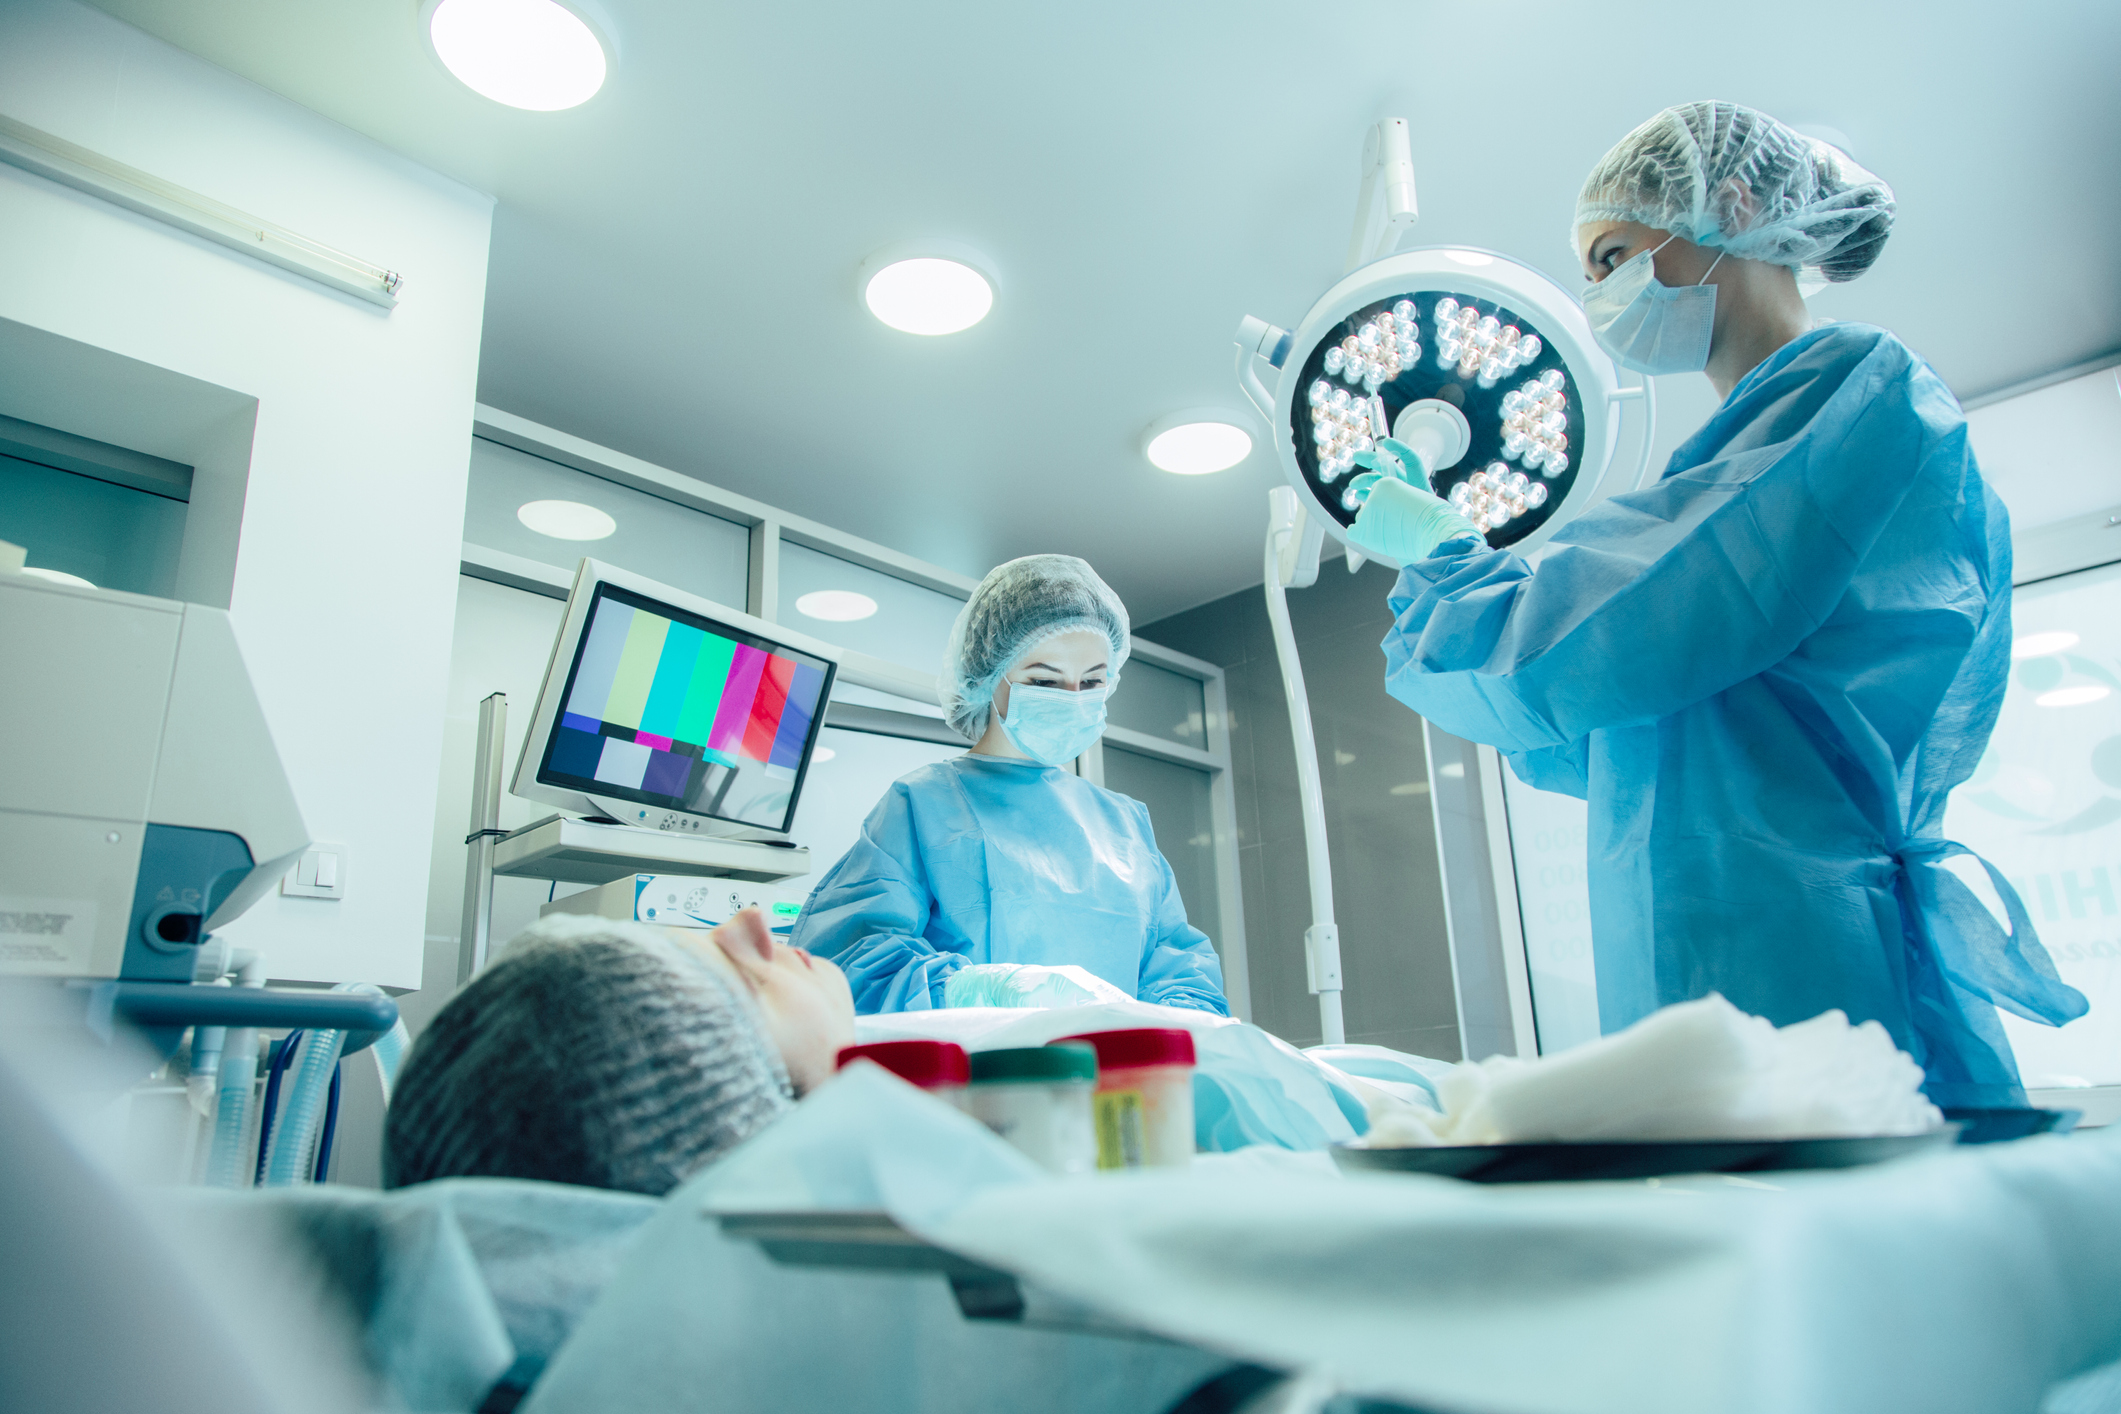 How to Become An Anesthesiologist